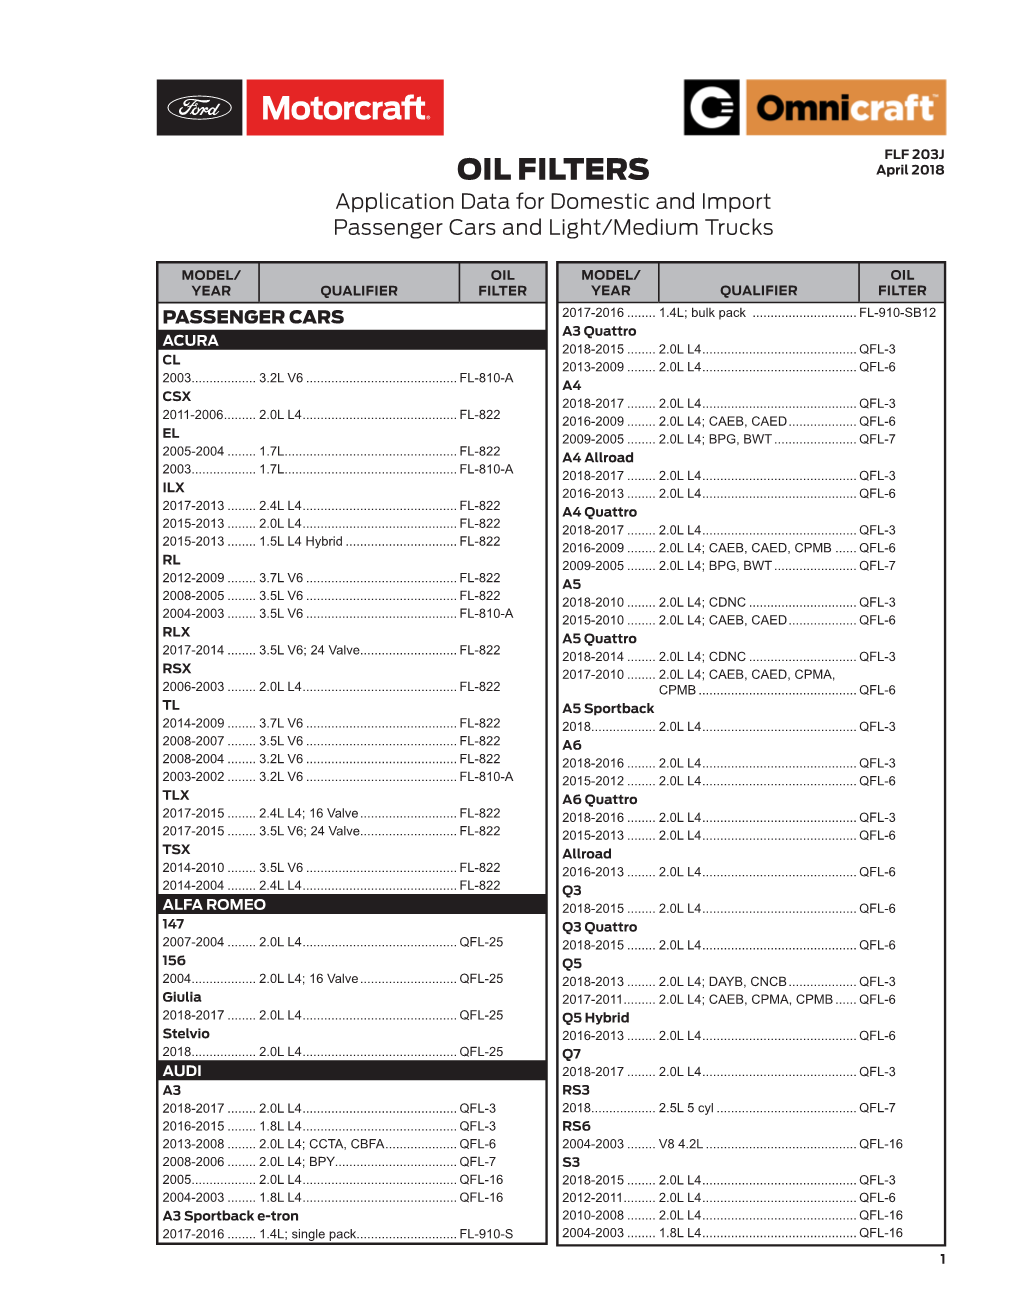 OIL FILTERS April 2018 Application Data for Domestic and Import Passenger Cars and Light/Medium Trucks